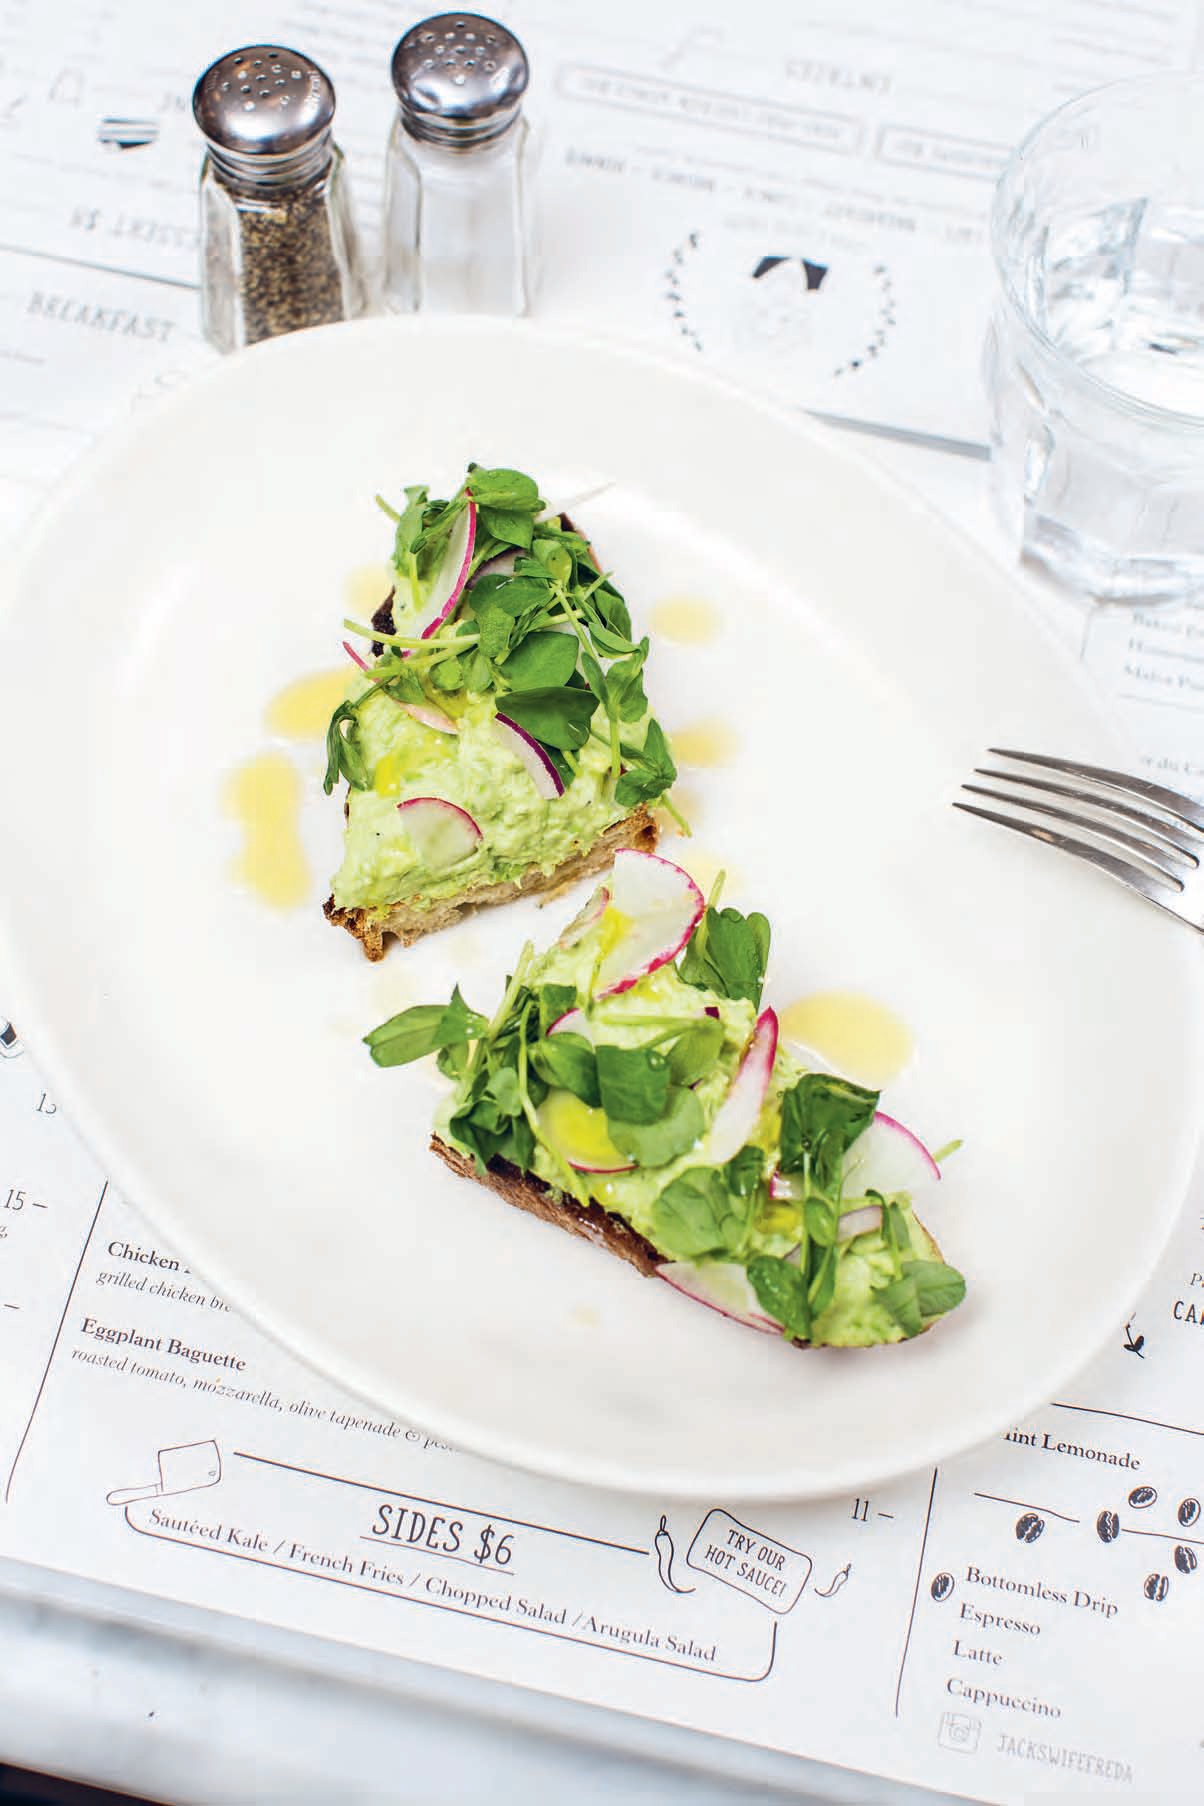 PHOTO: Pea and ricotta toast from Jack's Wife Freda in New York City.